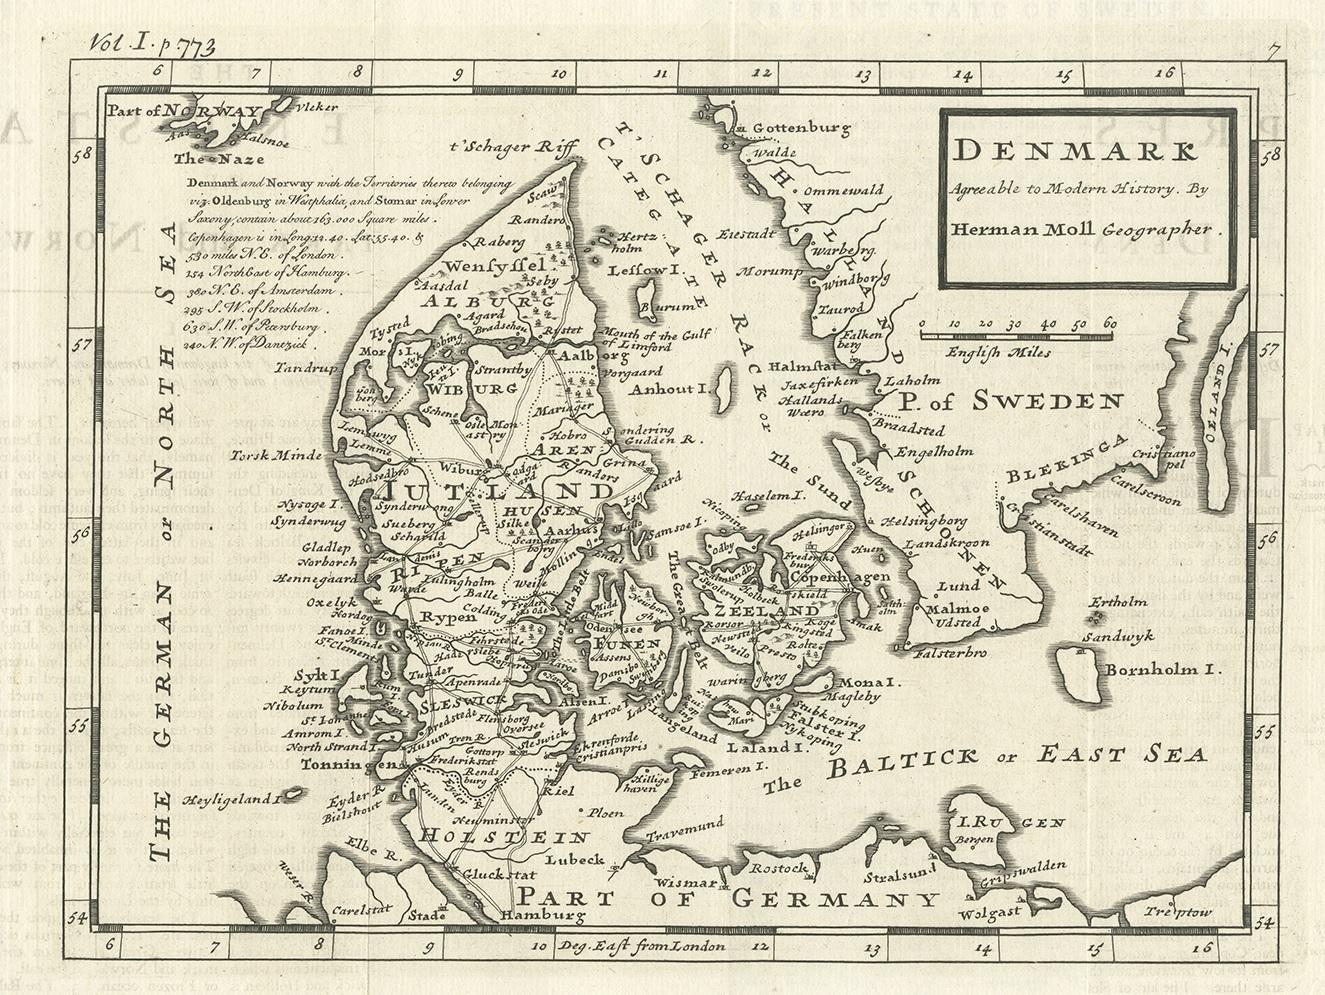 Antique map titled 'Denmark, agreeable to Modern History'. Uncommon map of Denmark by Herman Moll, published, circa 1730.